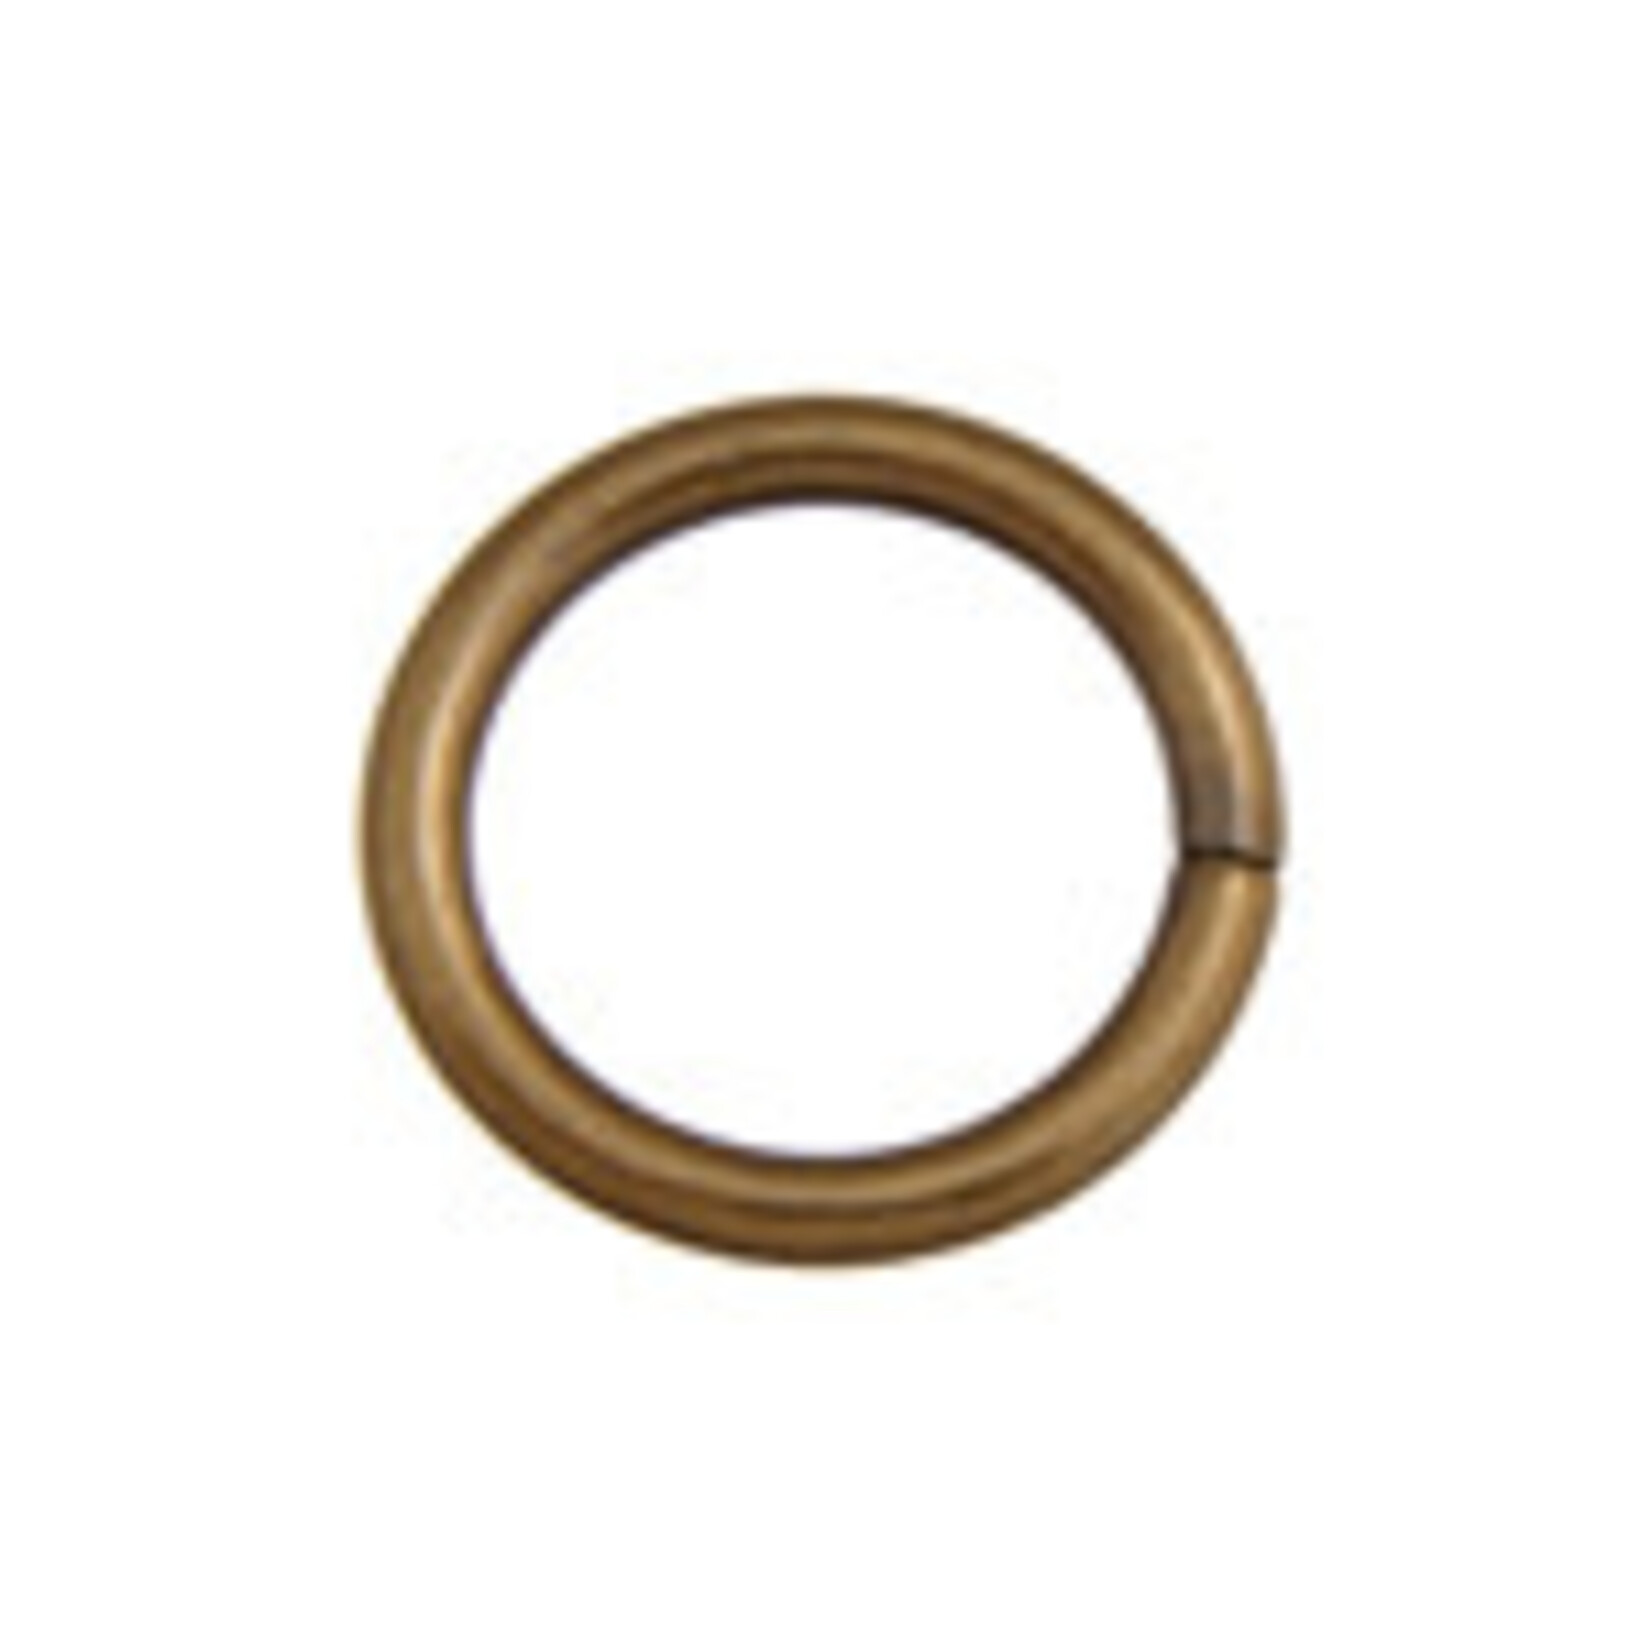 Jump Ring 20mm - Thick 2.6mm Antique Gold (25pcs)